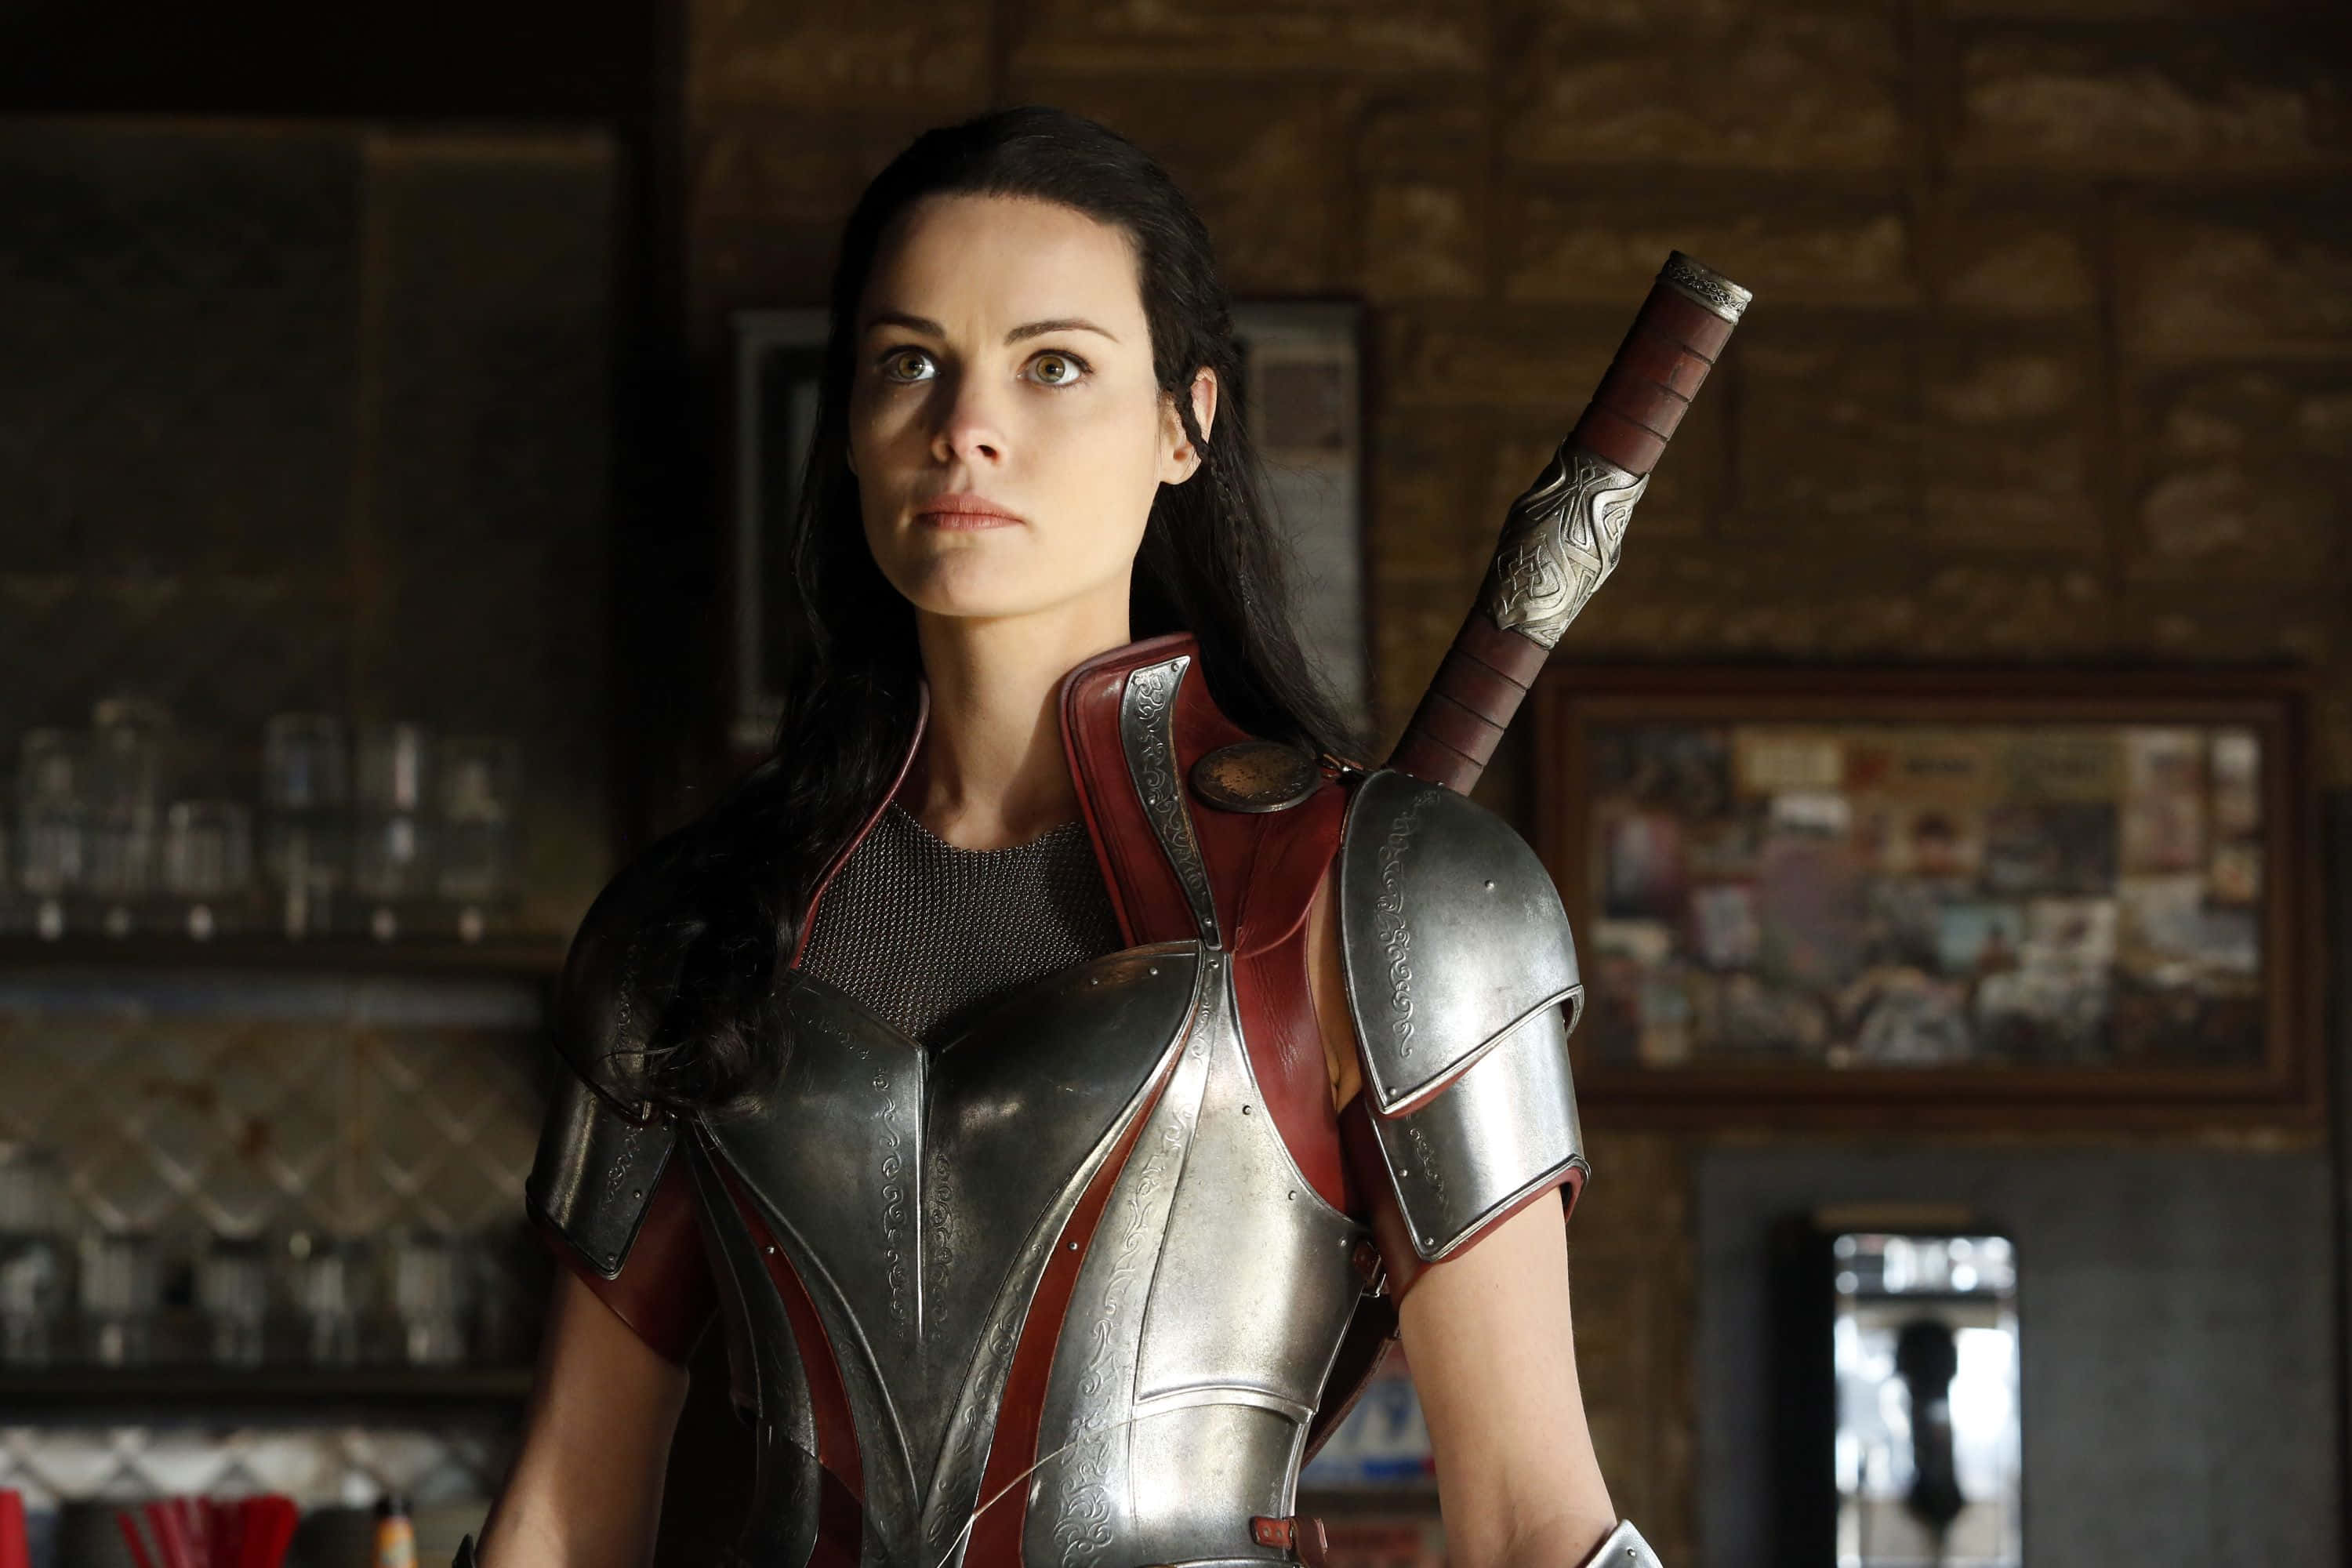 Lady Sif in a fierce action pose Wallpaper